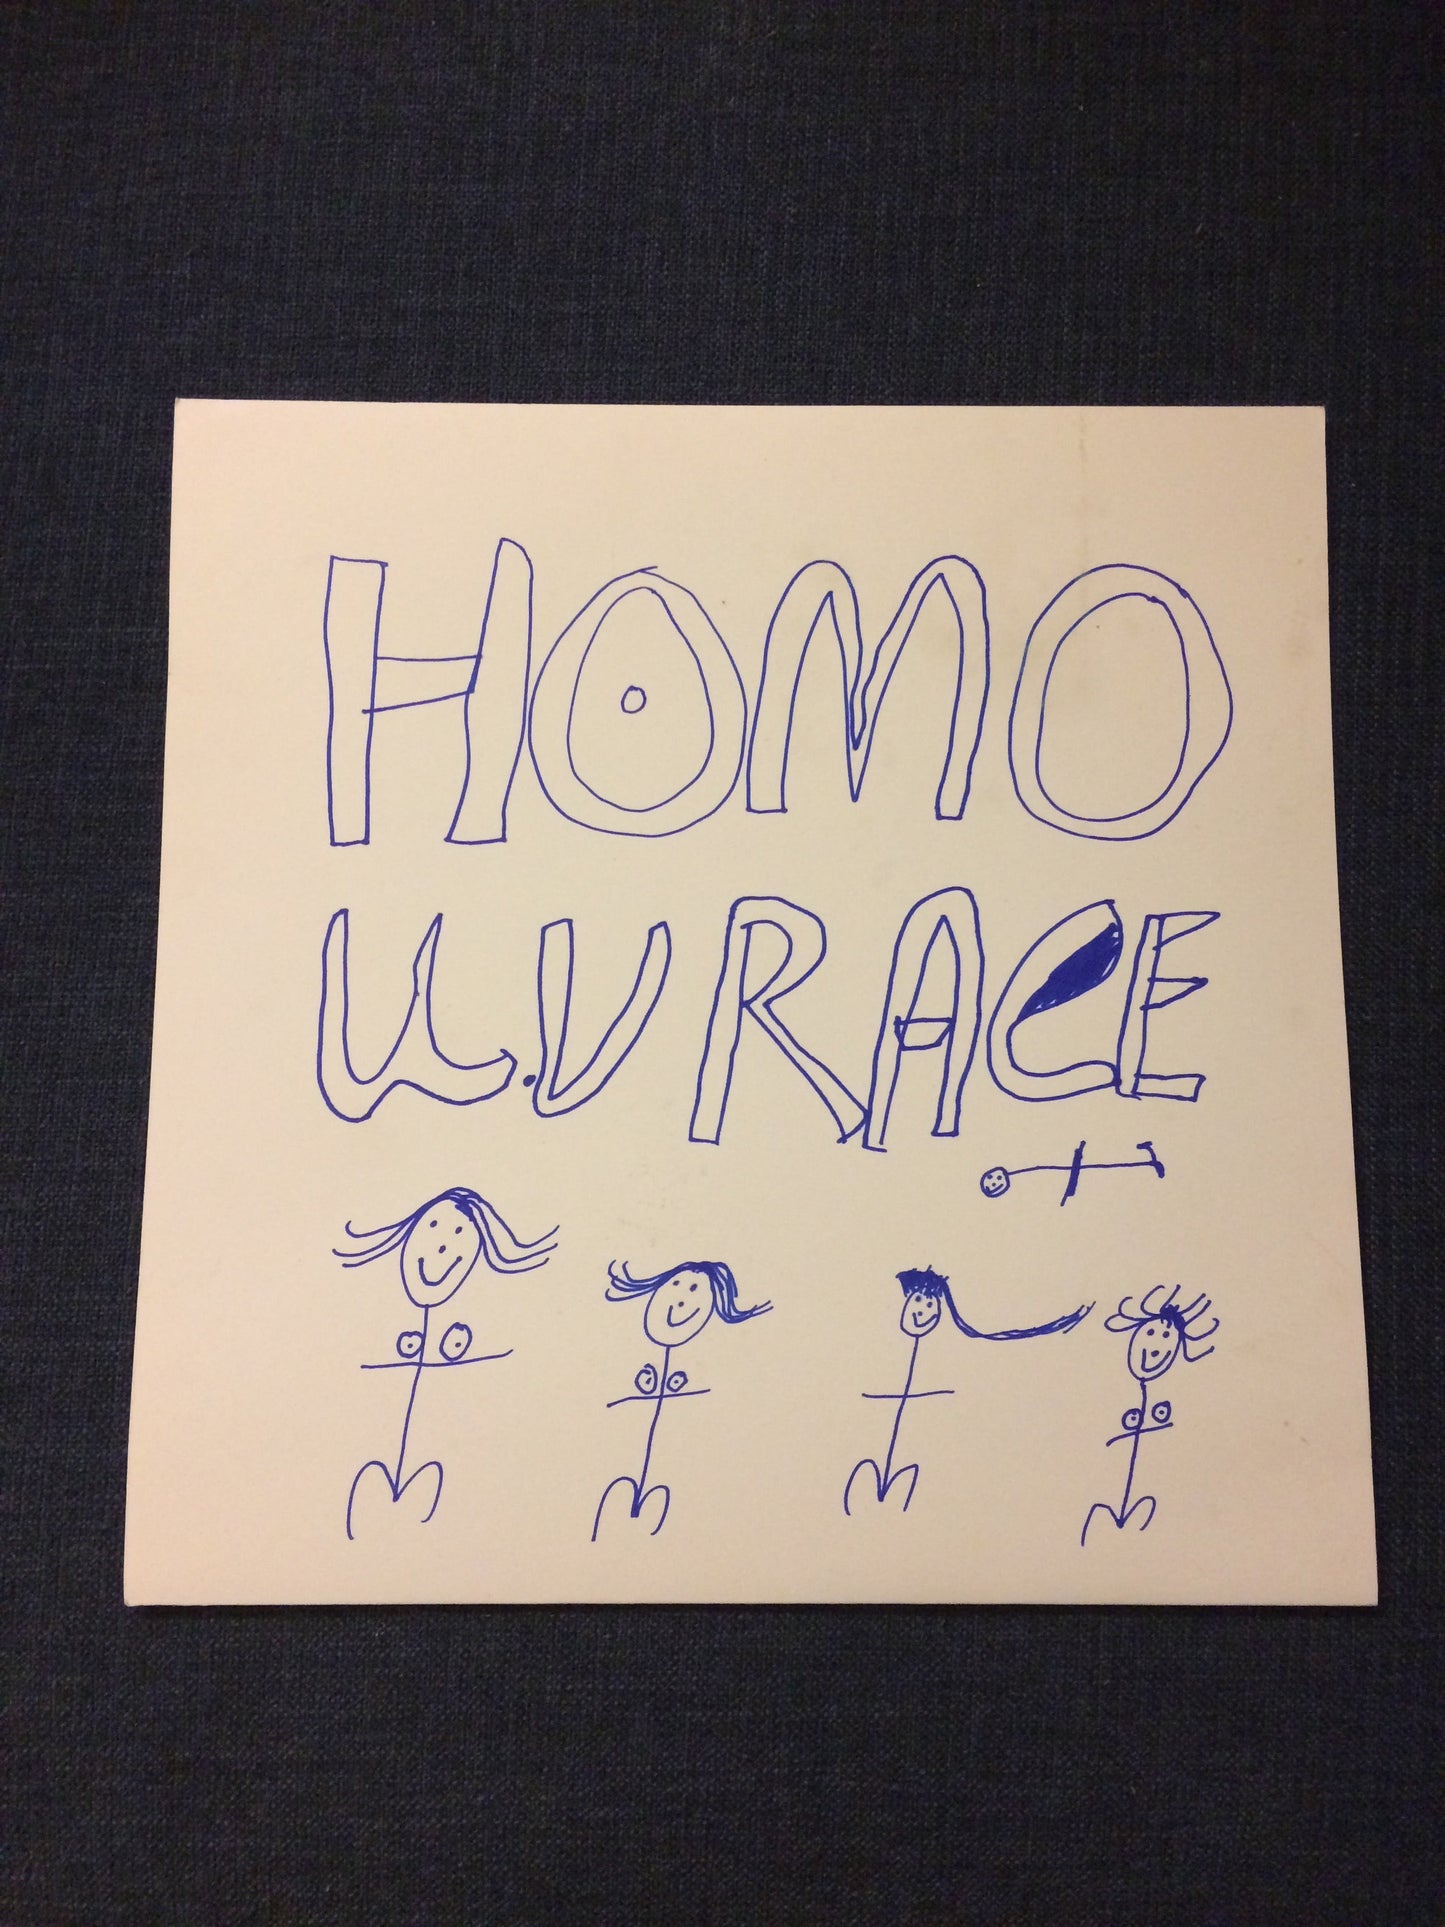 THE UV RACE - "HOMO" LP *LIMITED EDITION COVER*